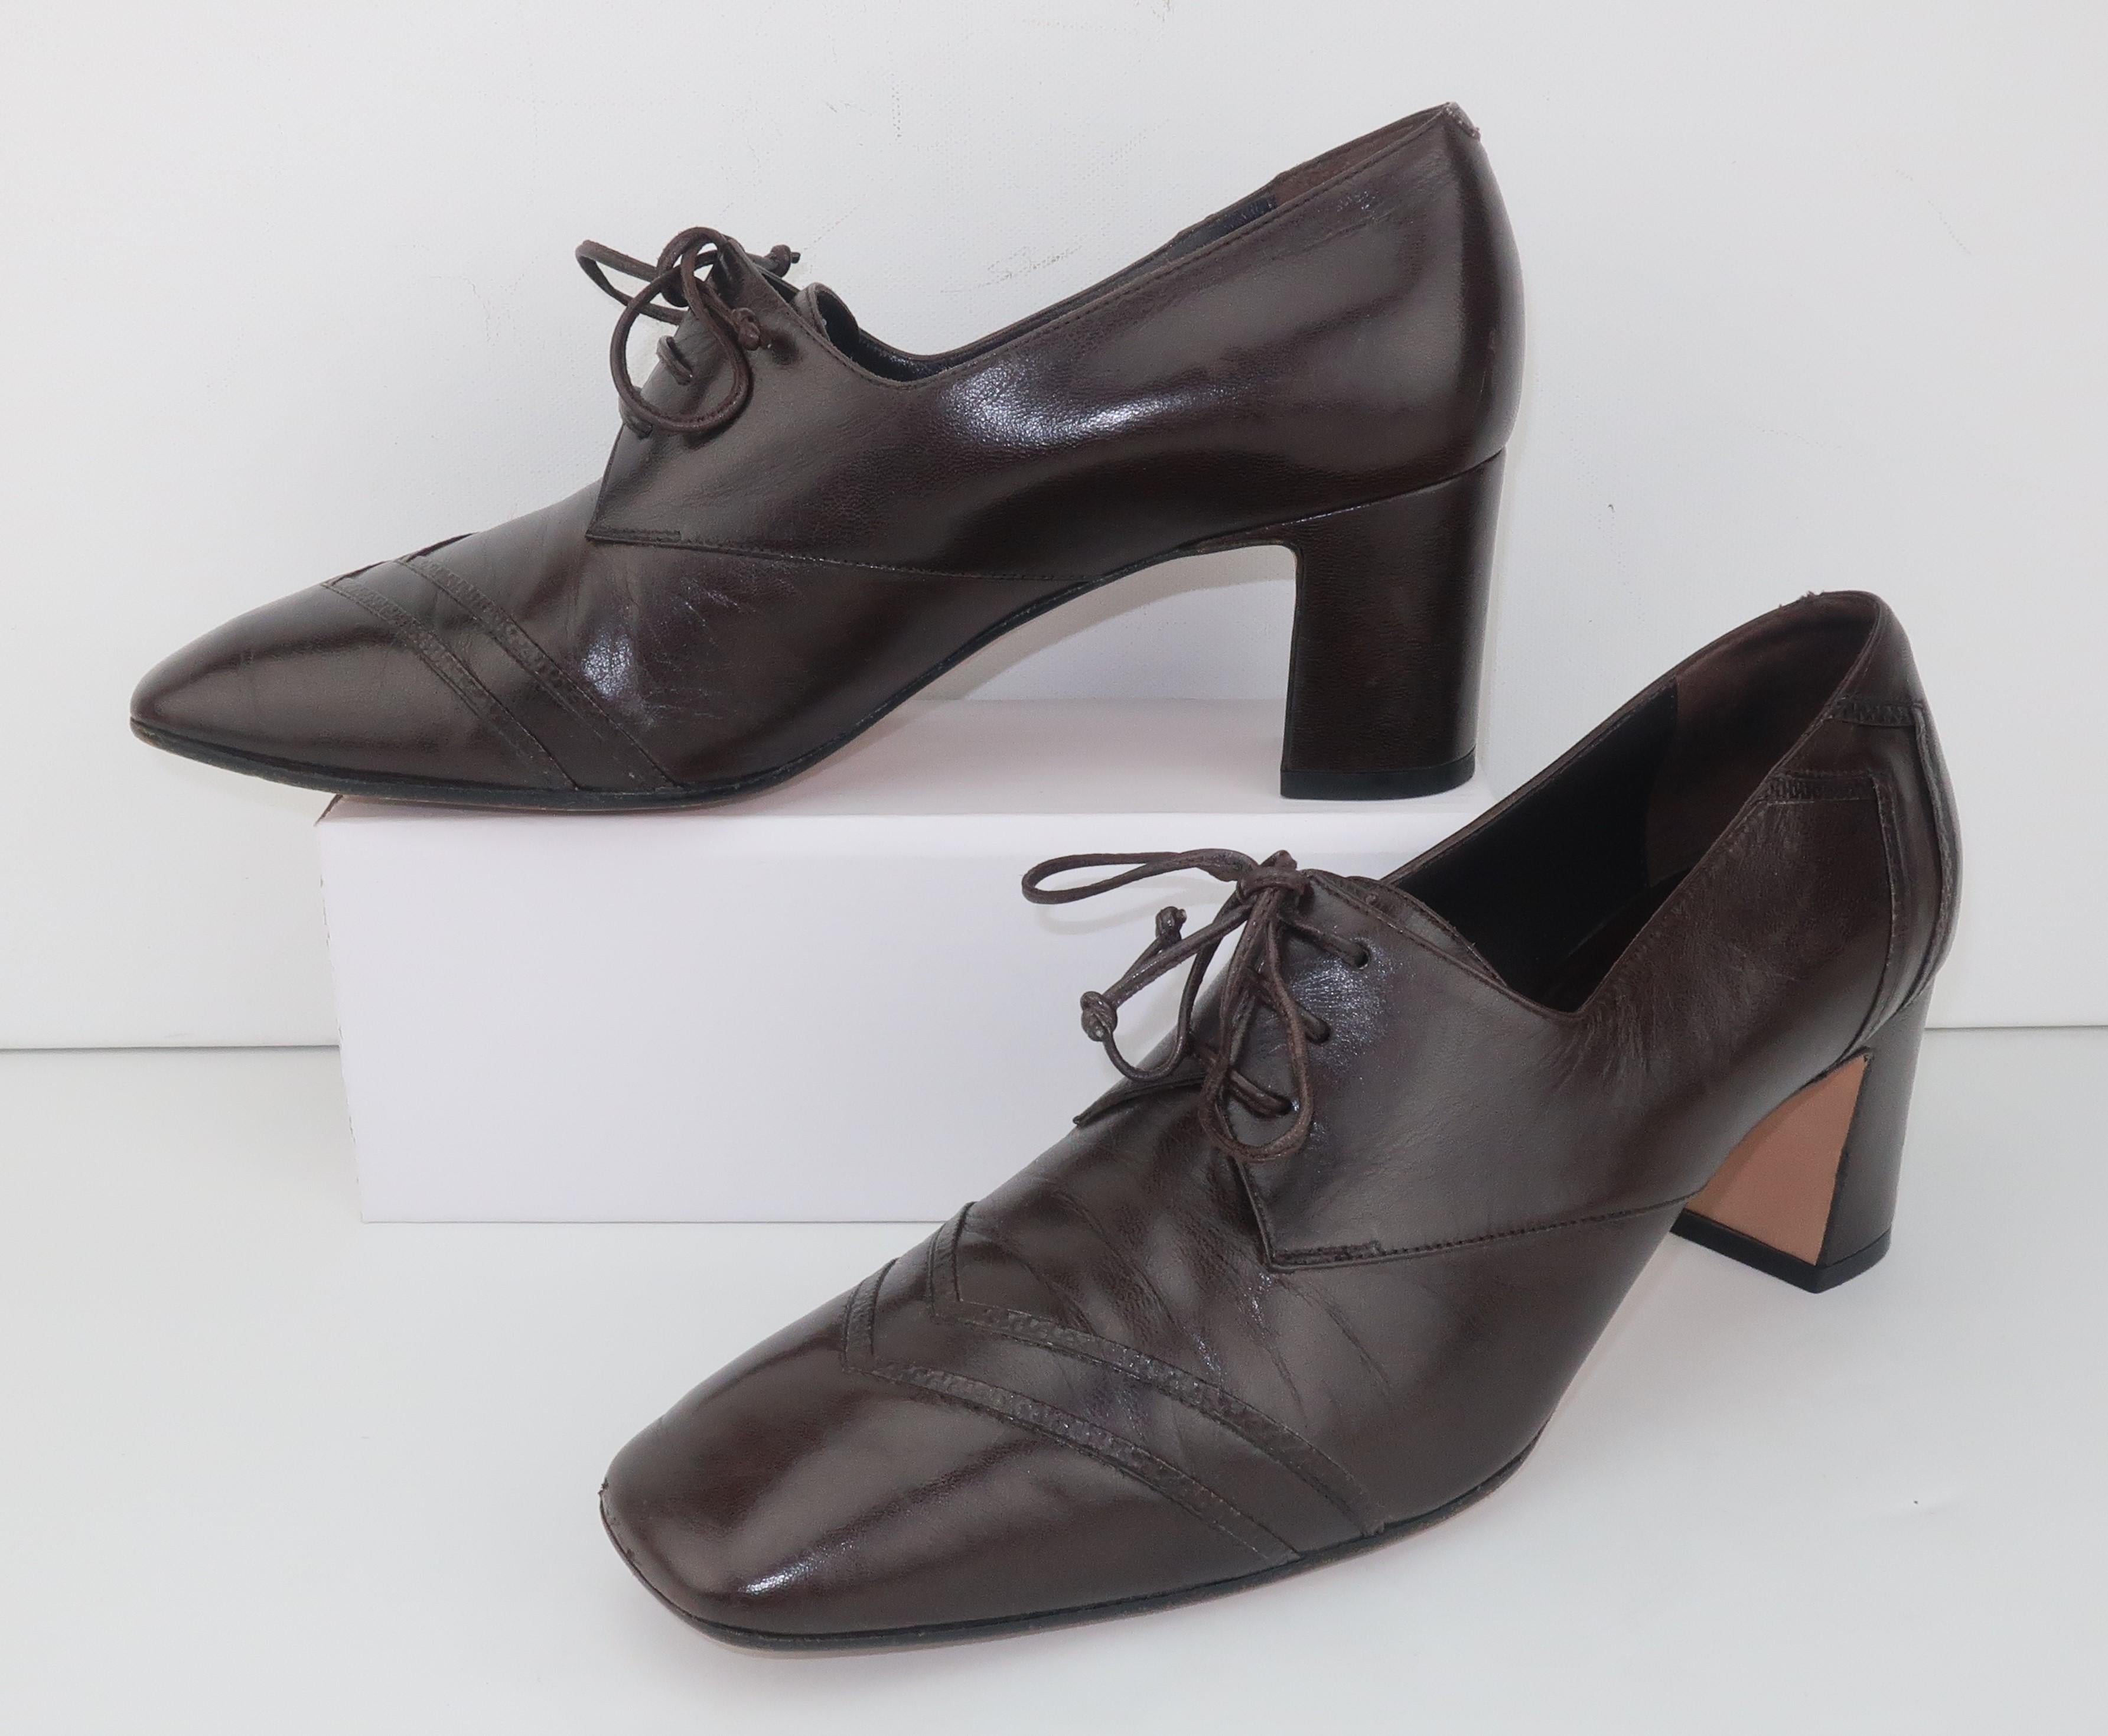 Bally dark brown leather oxford style shoe with Karung snakeskin details and sensible 2.5